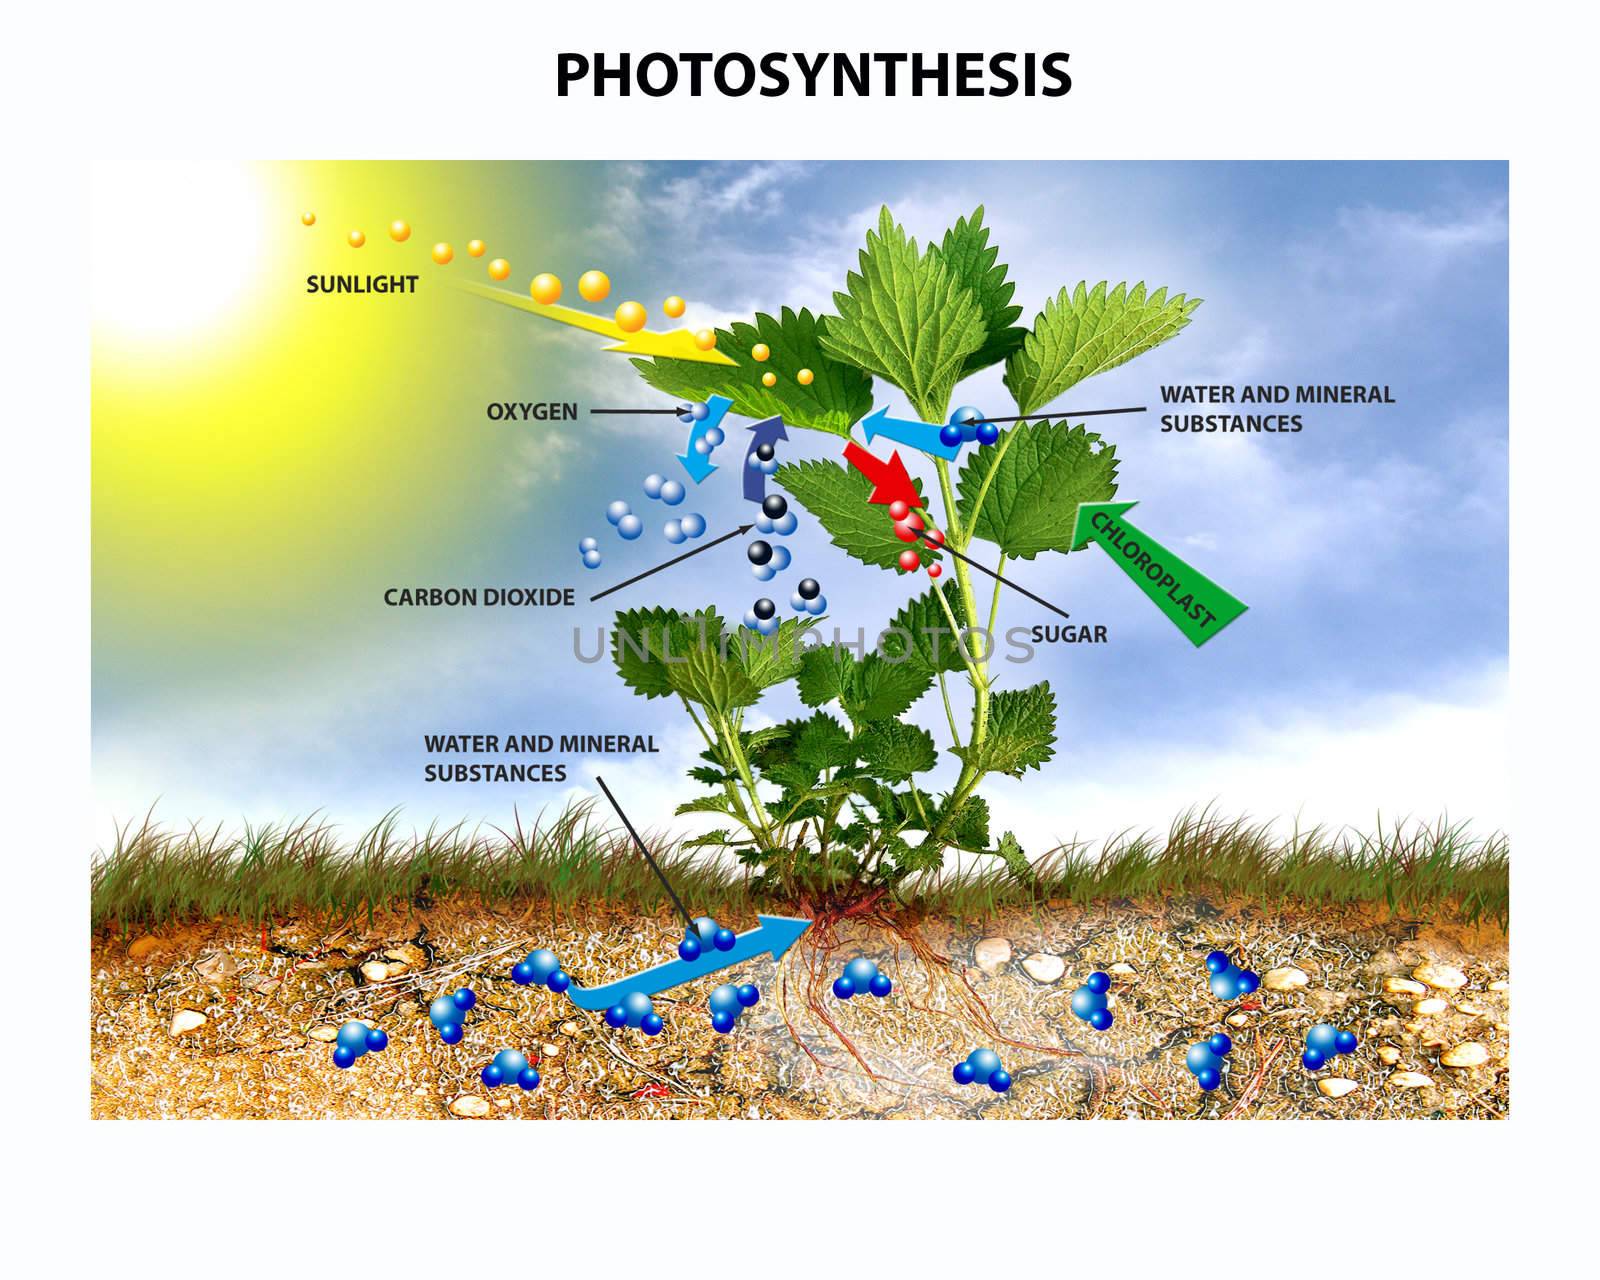 Showing the process of photosynthesis.